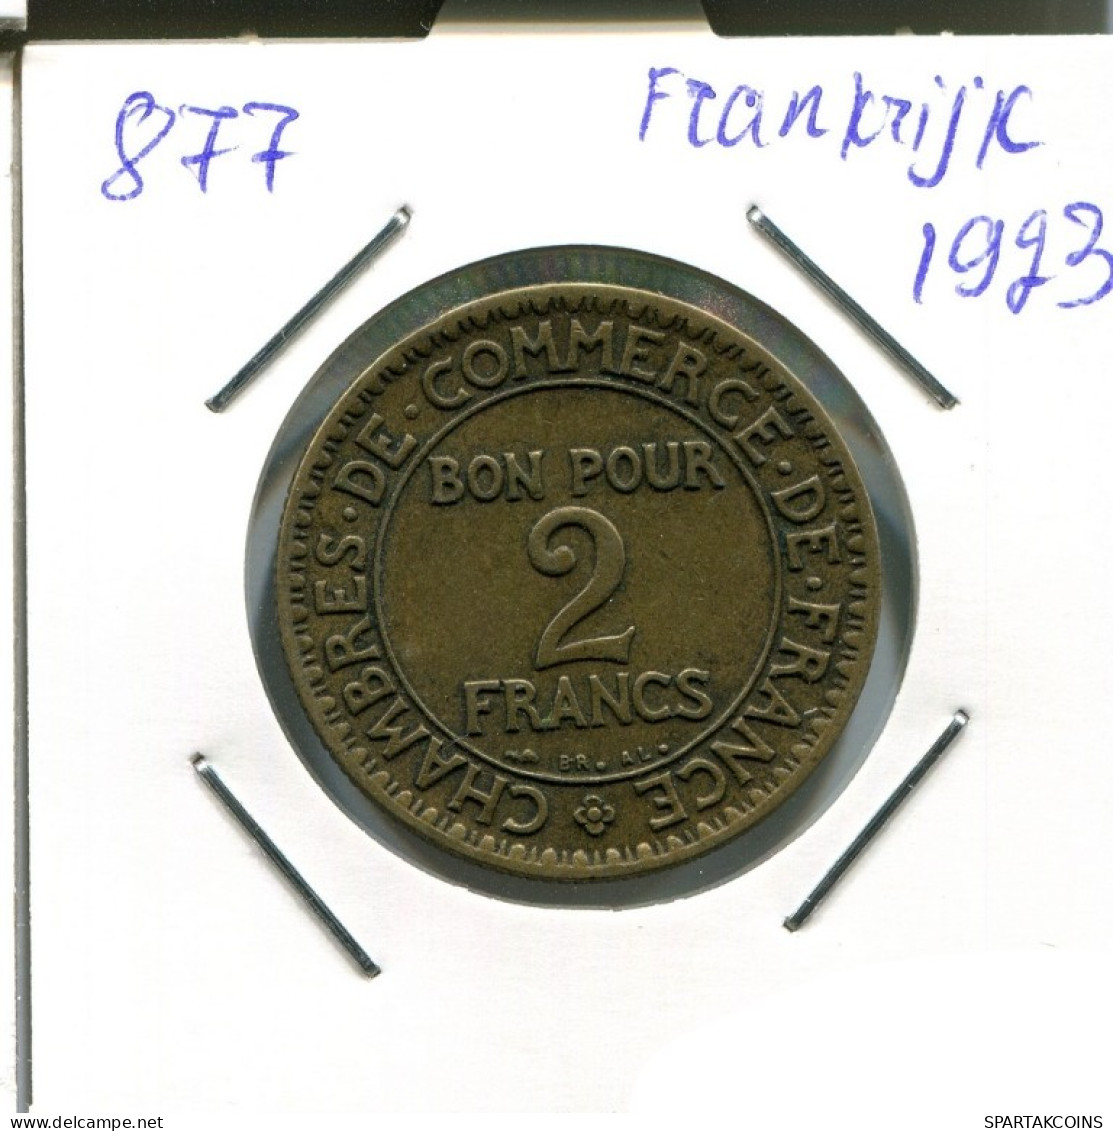 2 FRANCS 1923 FRANCE French Coin #AN333.U.A - 2 Francs